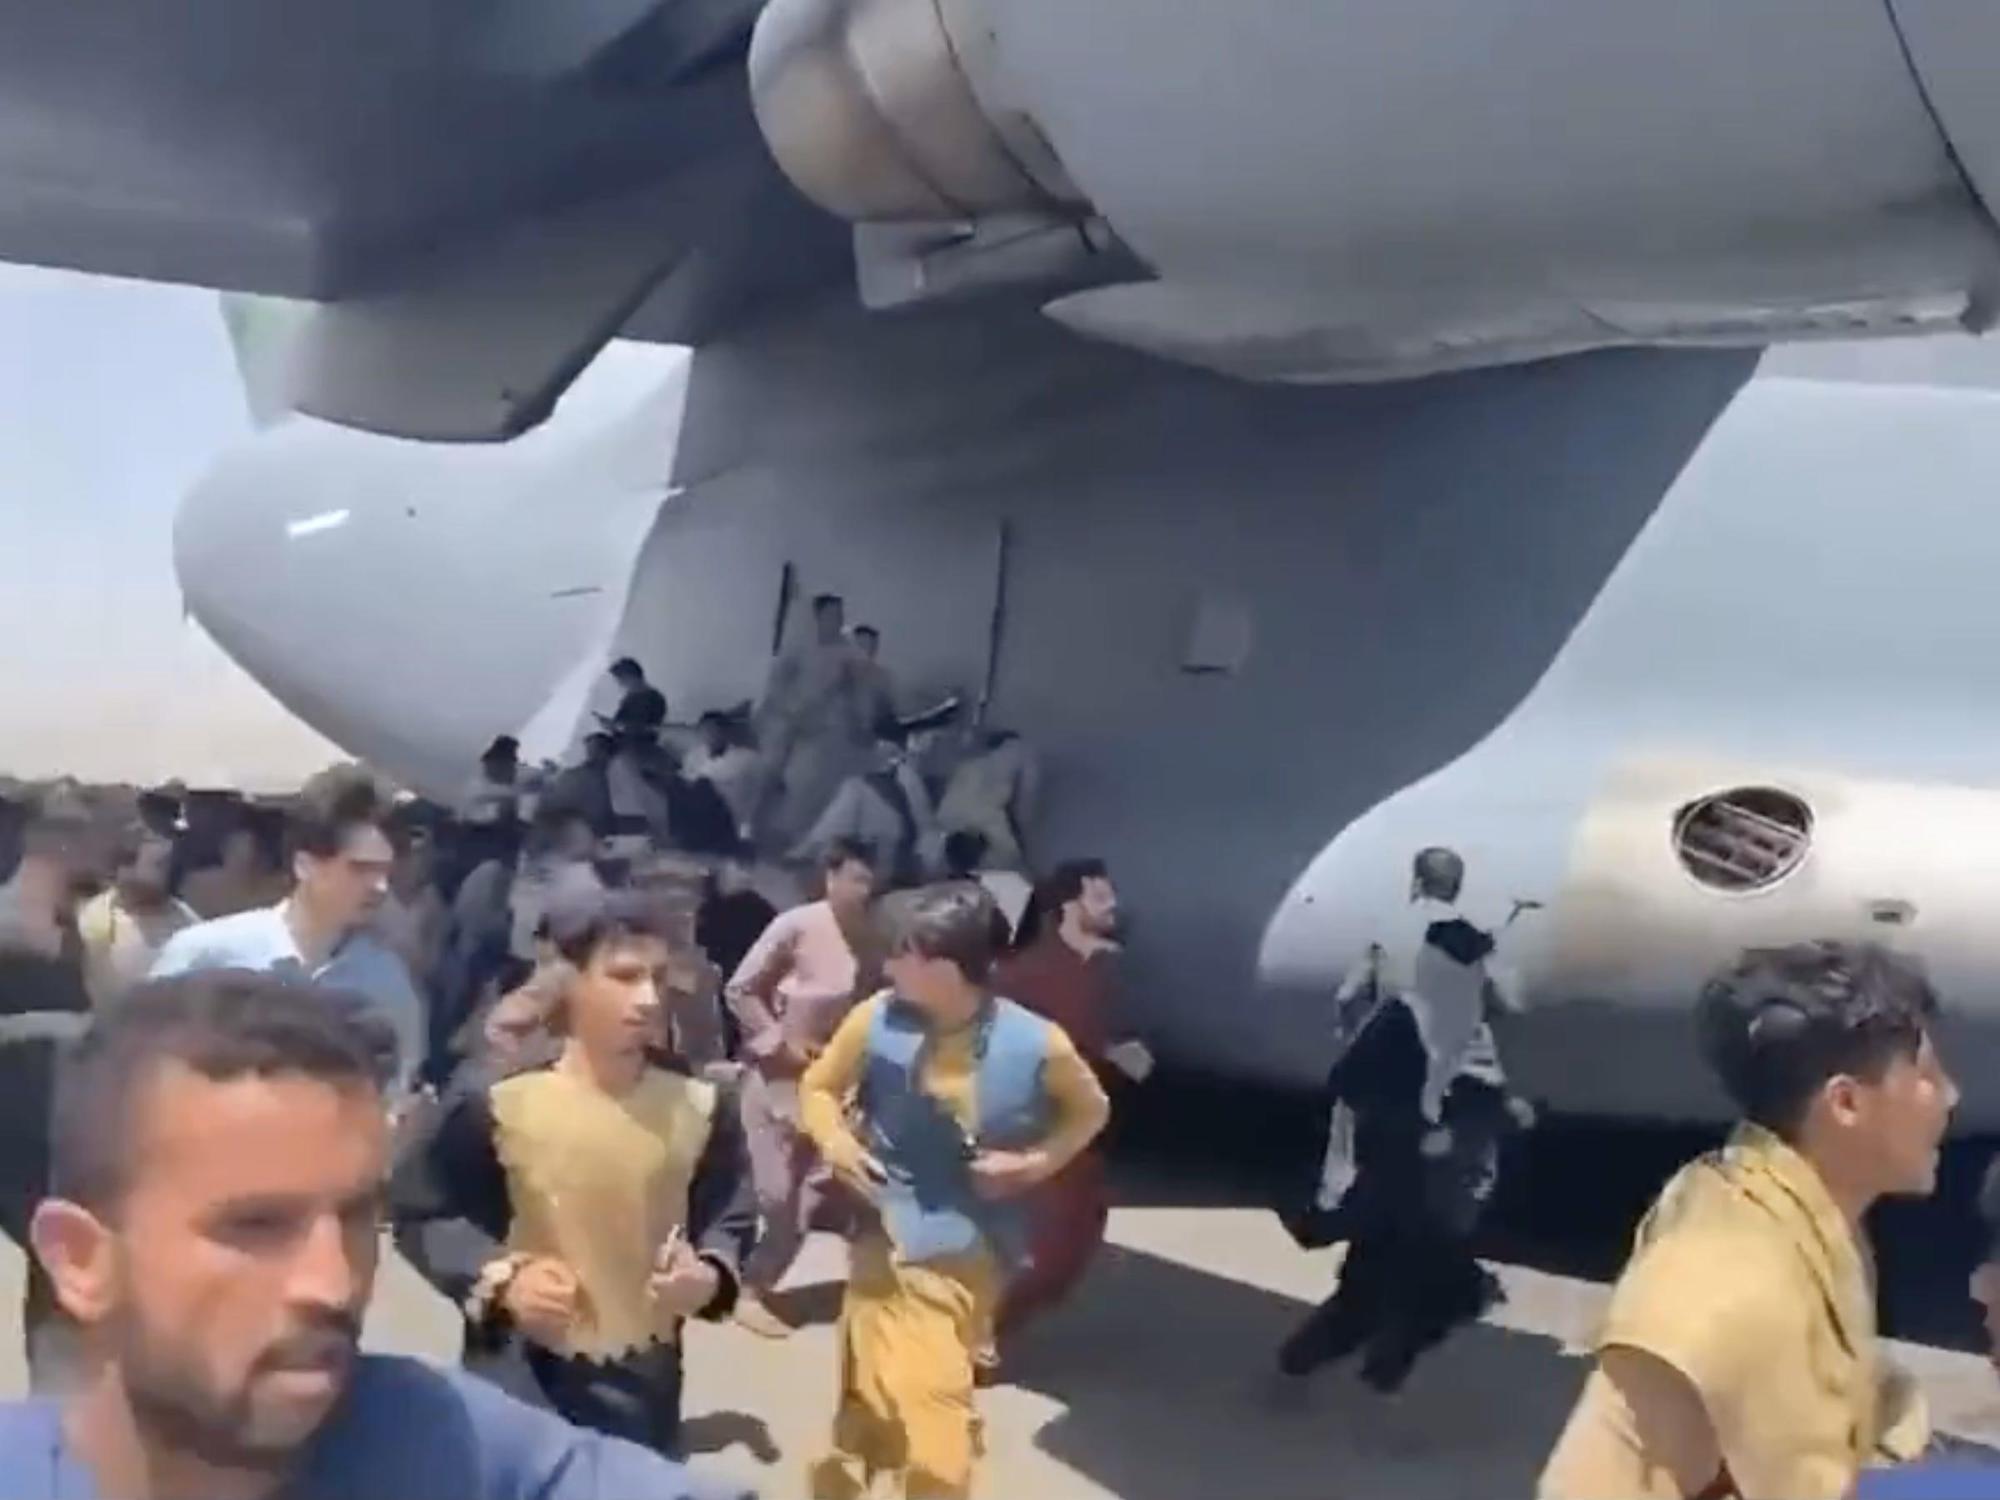 Video shows people clinging to a US Air Force plane at Kabul airport as they desperately try to flee Afghanistan